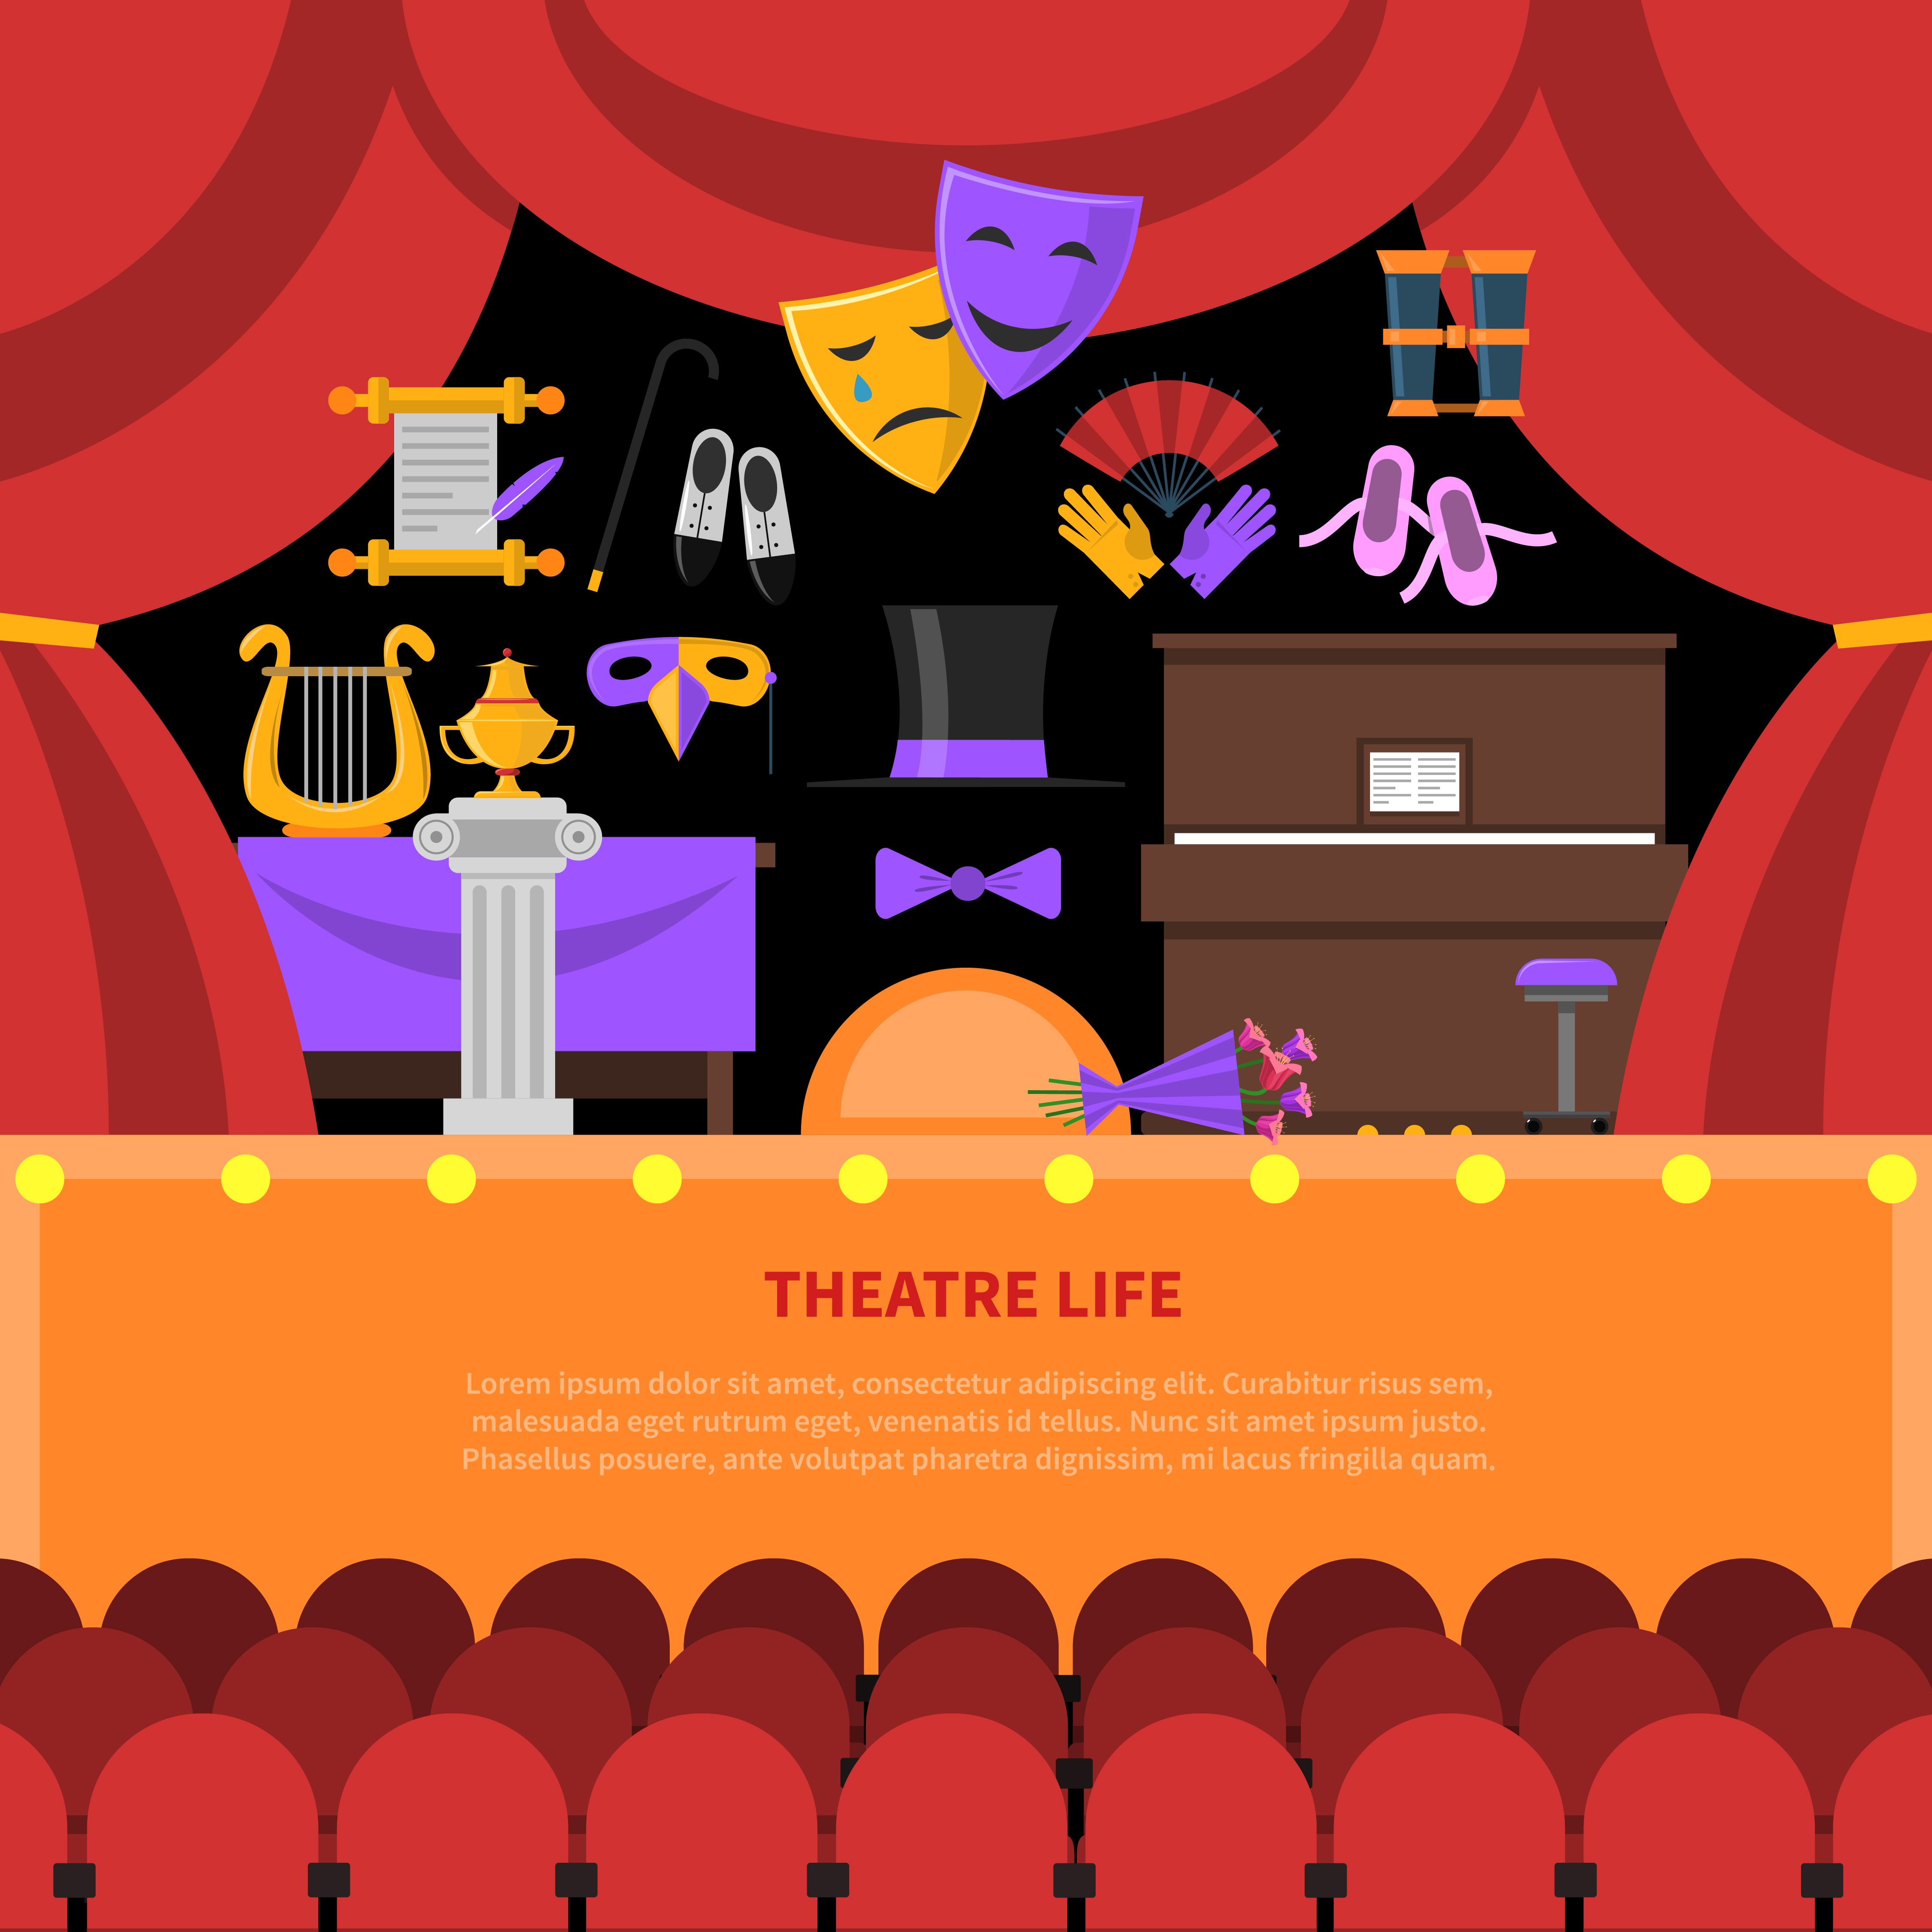 Life is theater